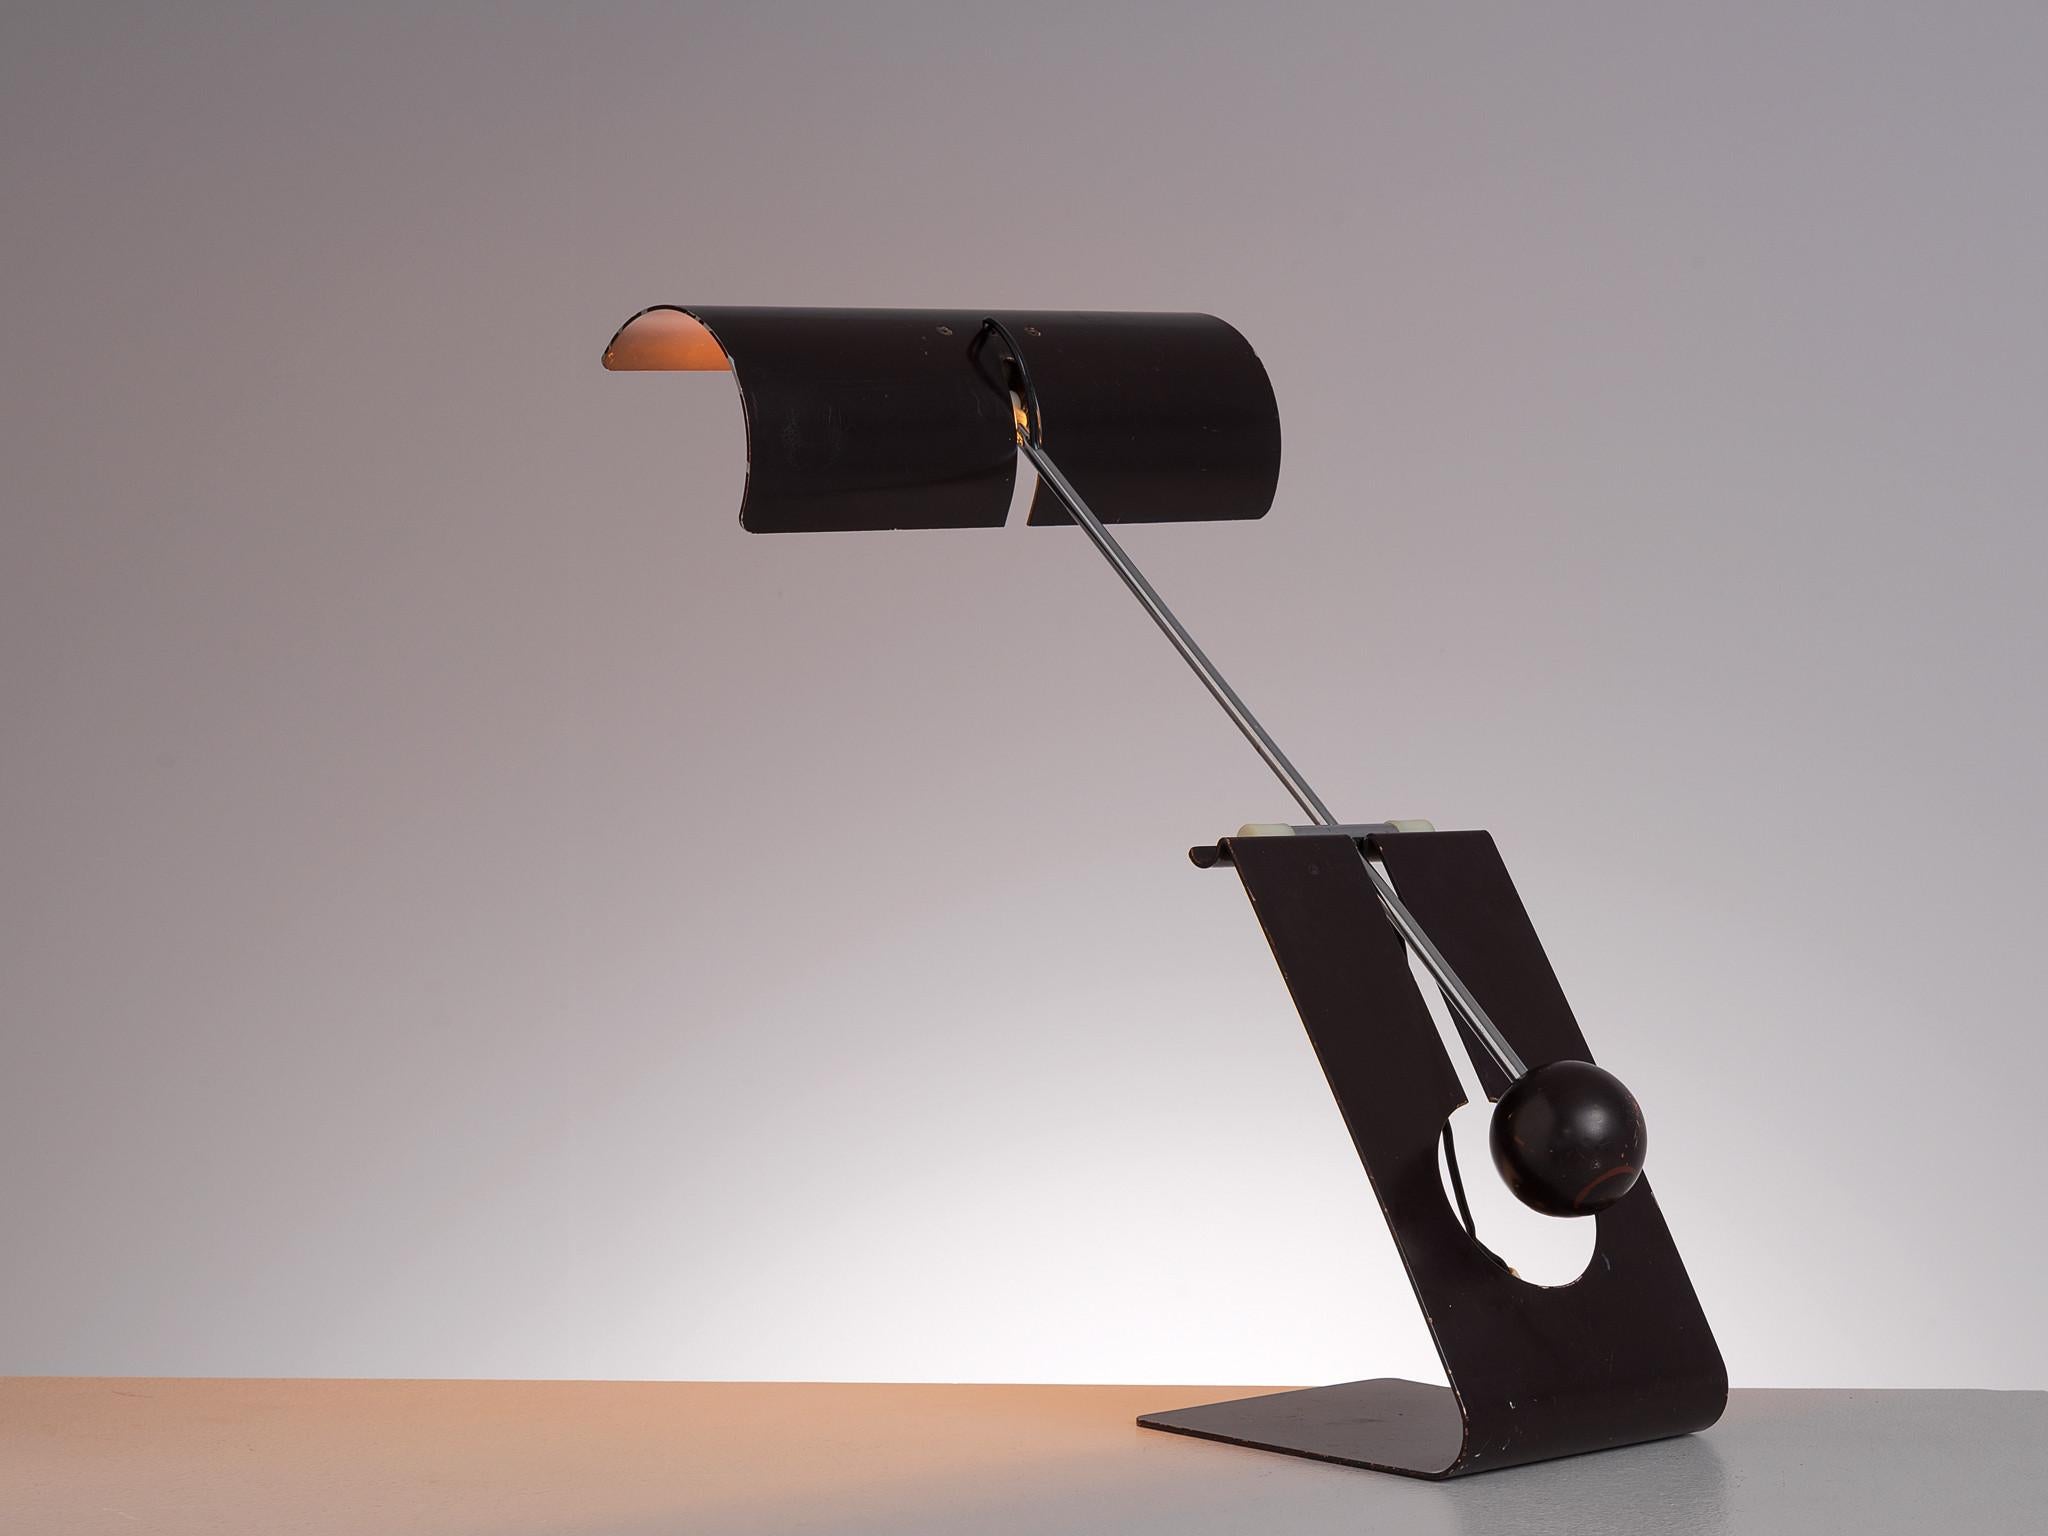 Mauro Martini for Fratelli, 'Picchio' table lamp, brown coated aluminium, Italy, 1960s.

This postmodern table lamp is designed by Mauro Martini for Fratelli. The name Picchio, meaning woodpecker in English, is taken from the shape of this lamp